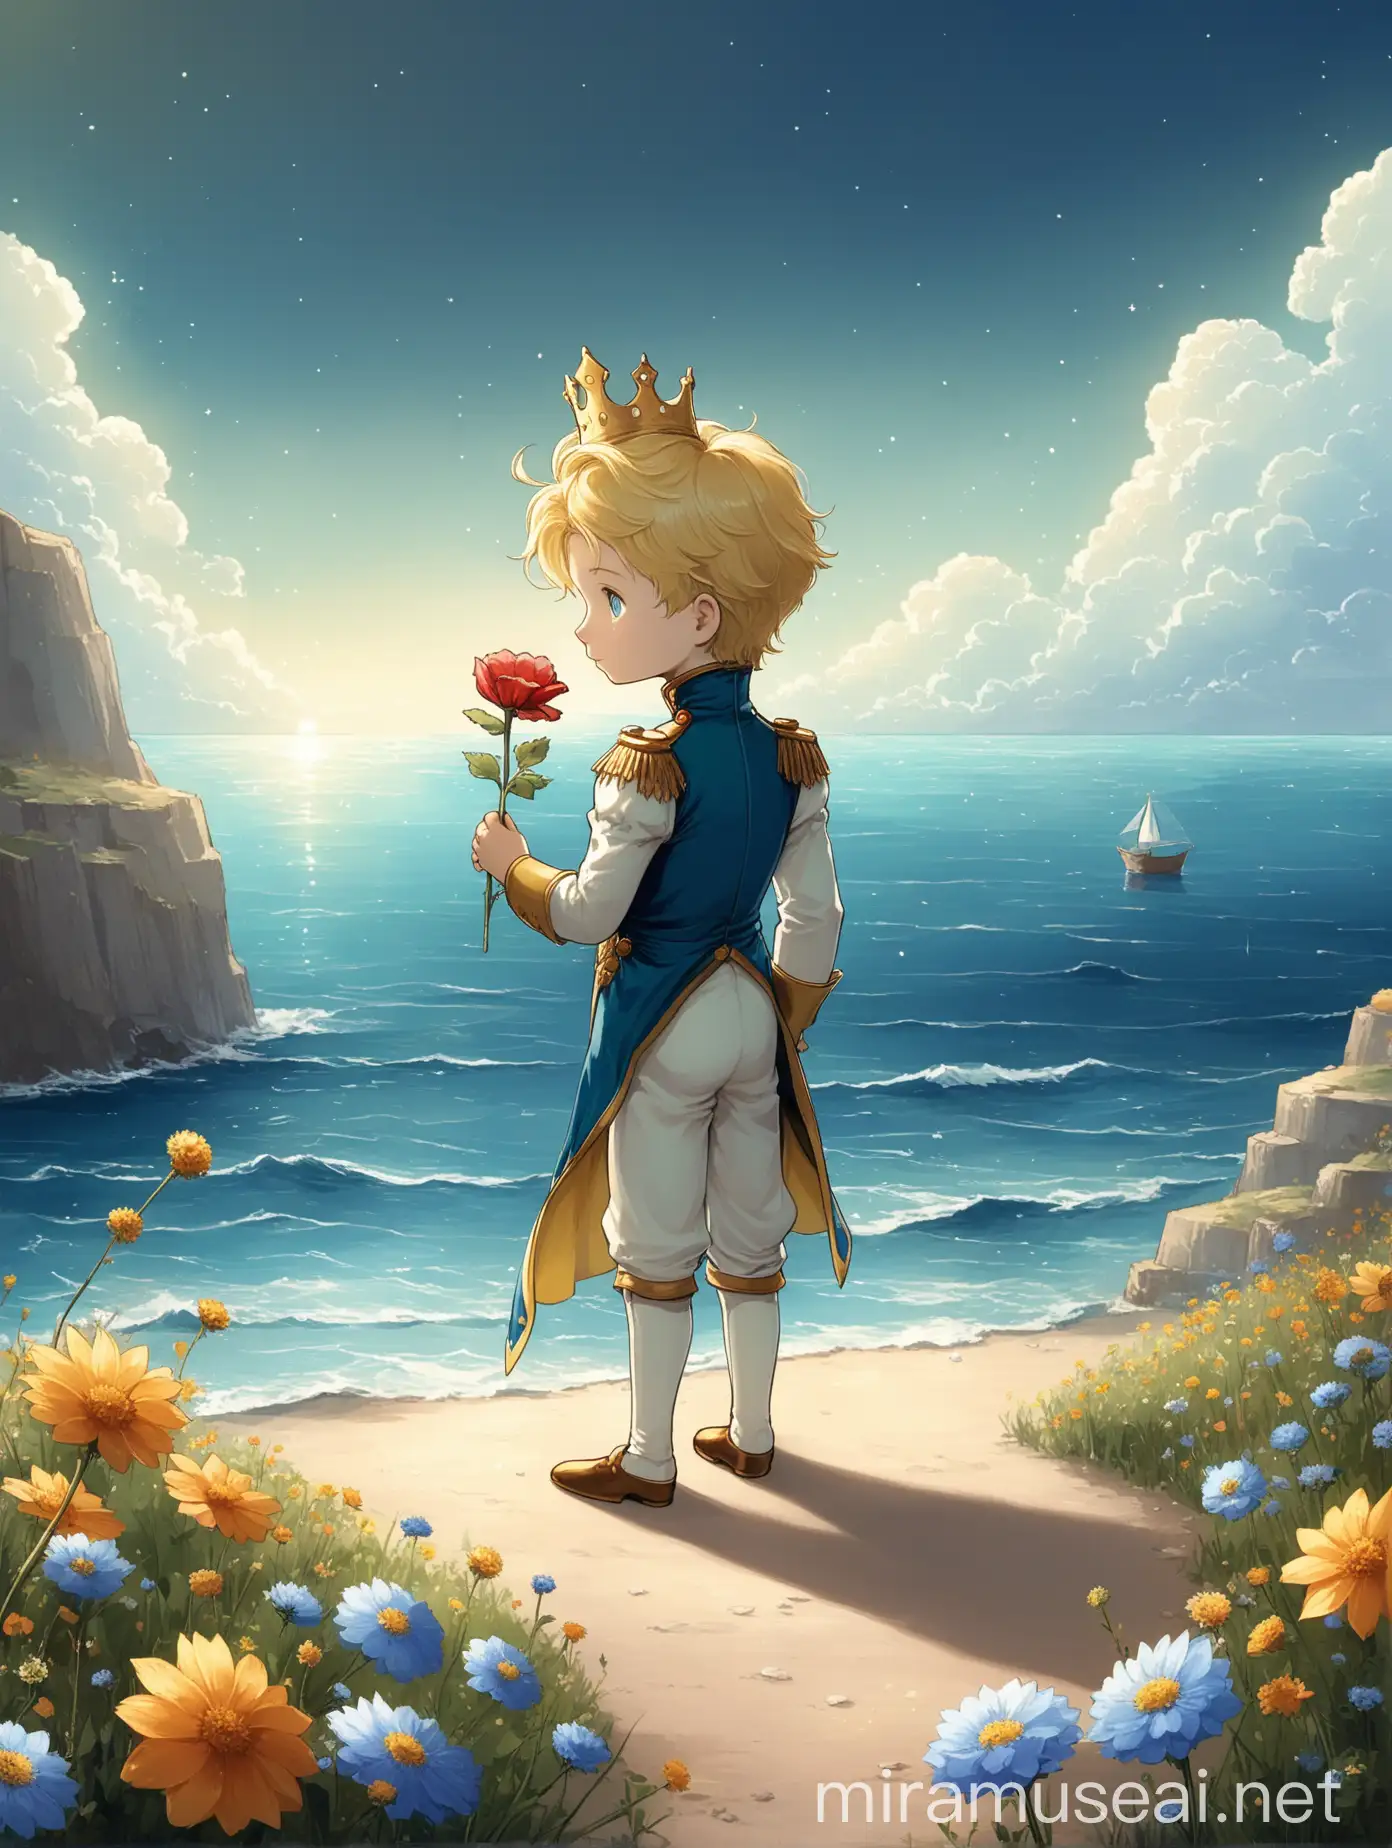 Curious Little Prince Admiring Flower by the Sea